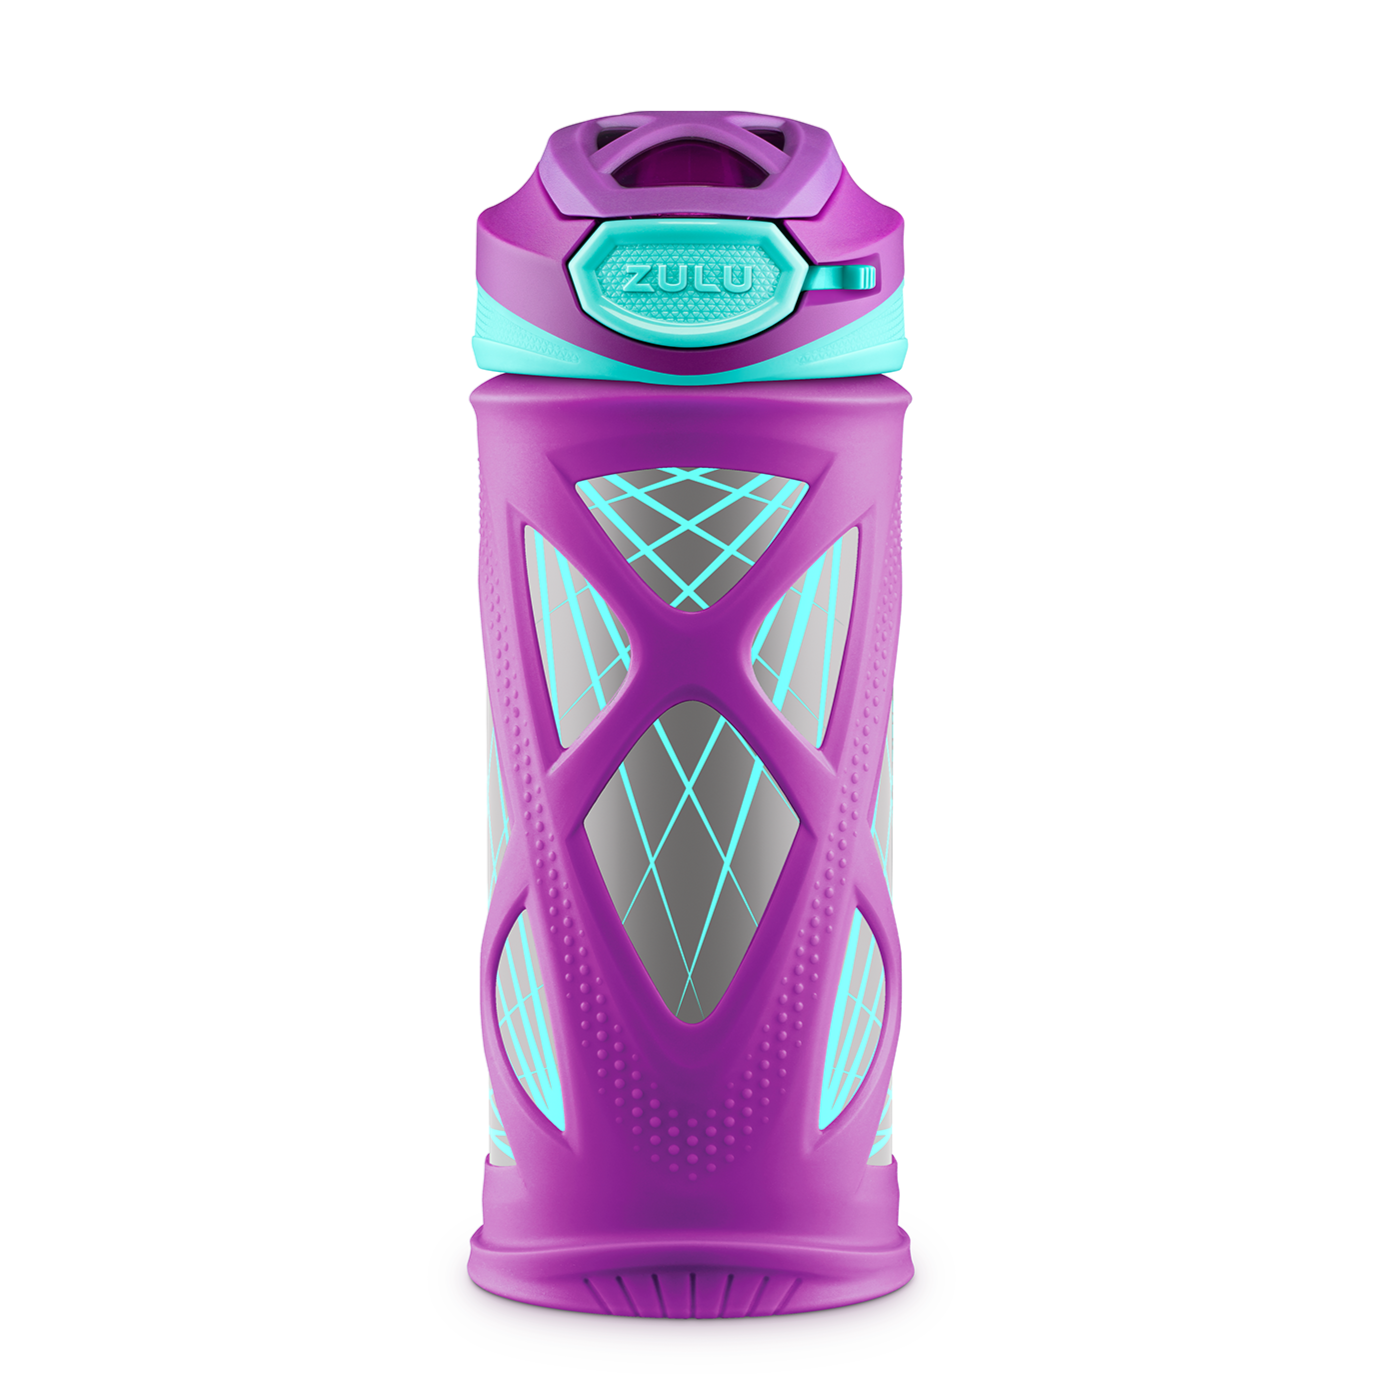 Youth Insulated Kids' Water Bottle - Purple